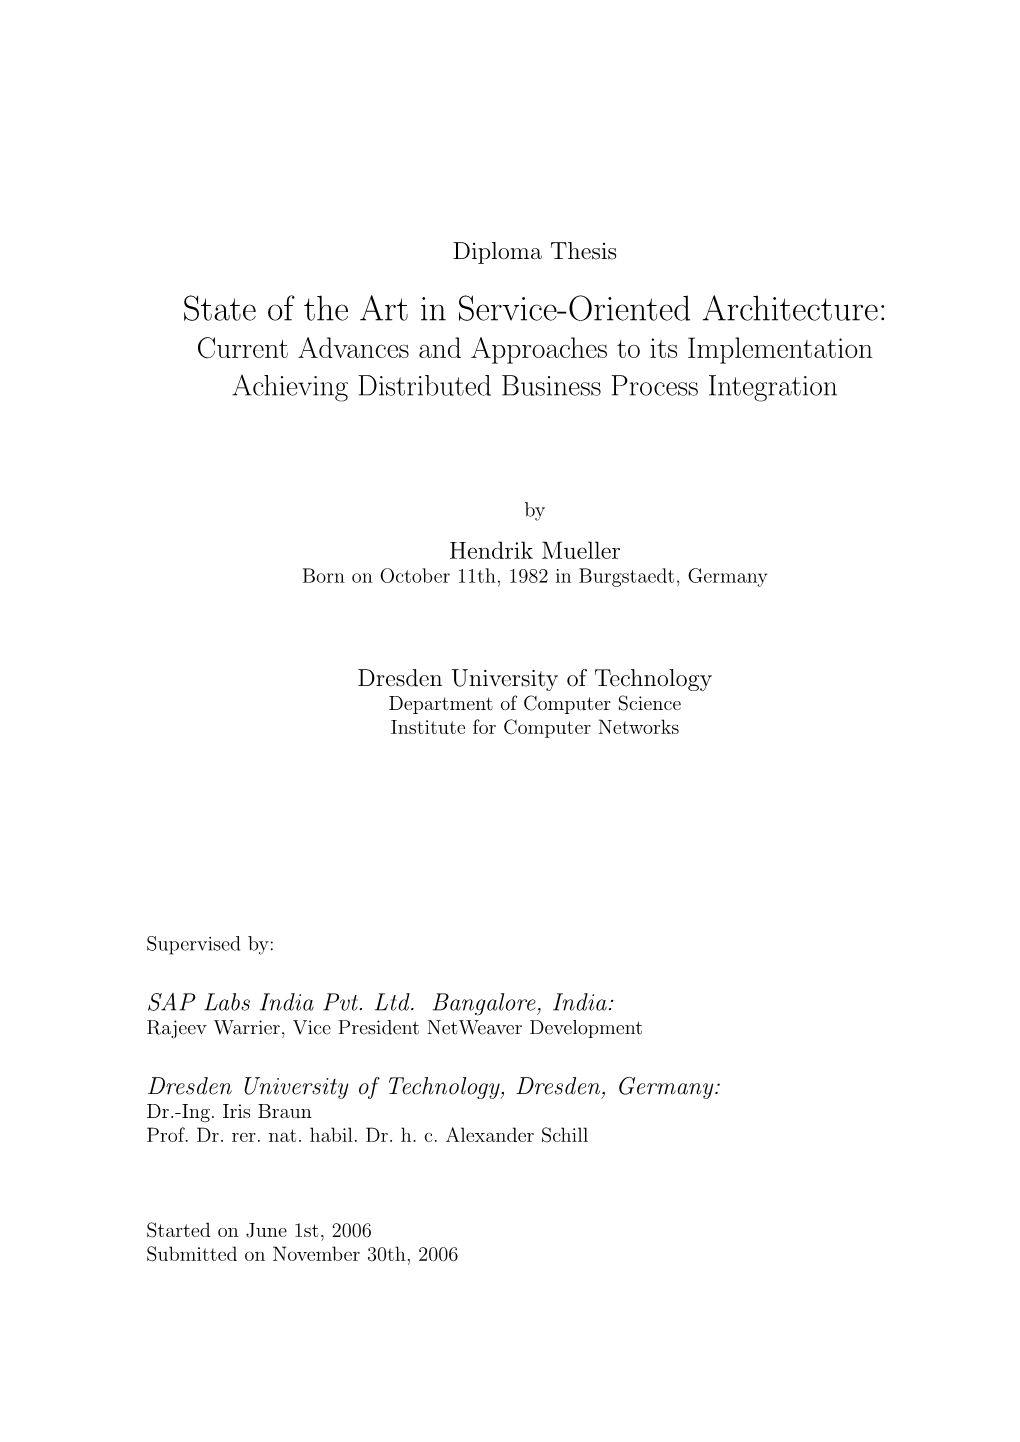 Diploma Thesis "Service-Oriented Architecture State of the Art"